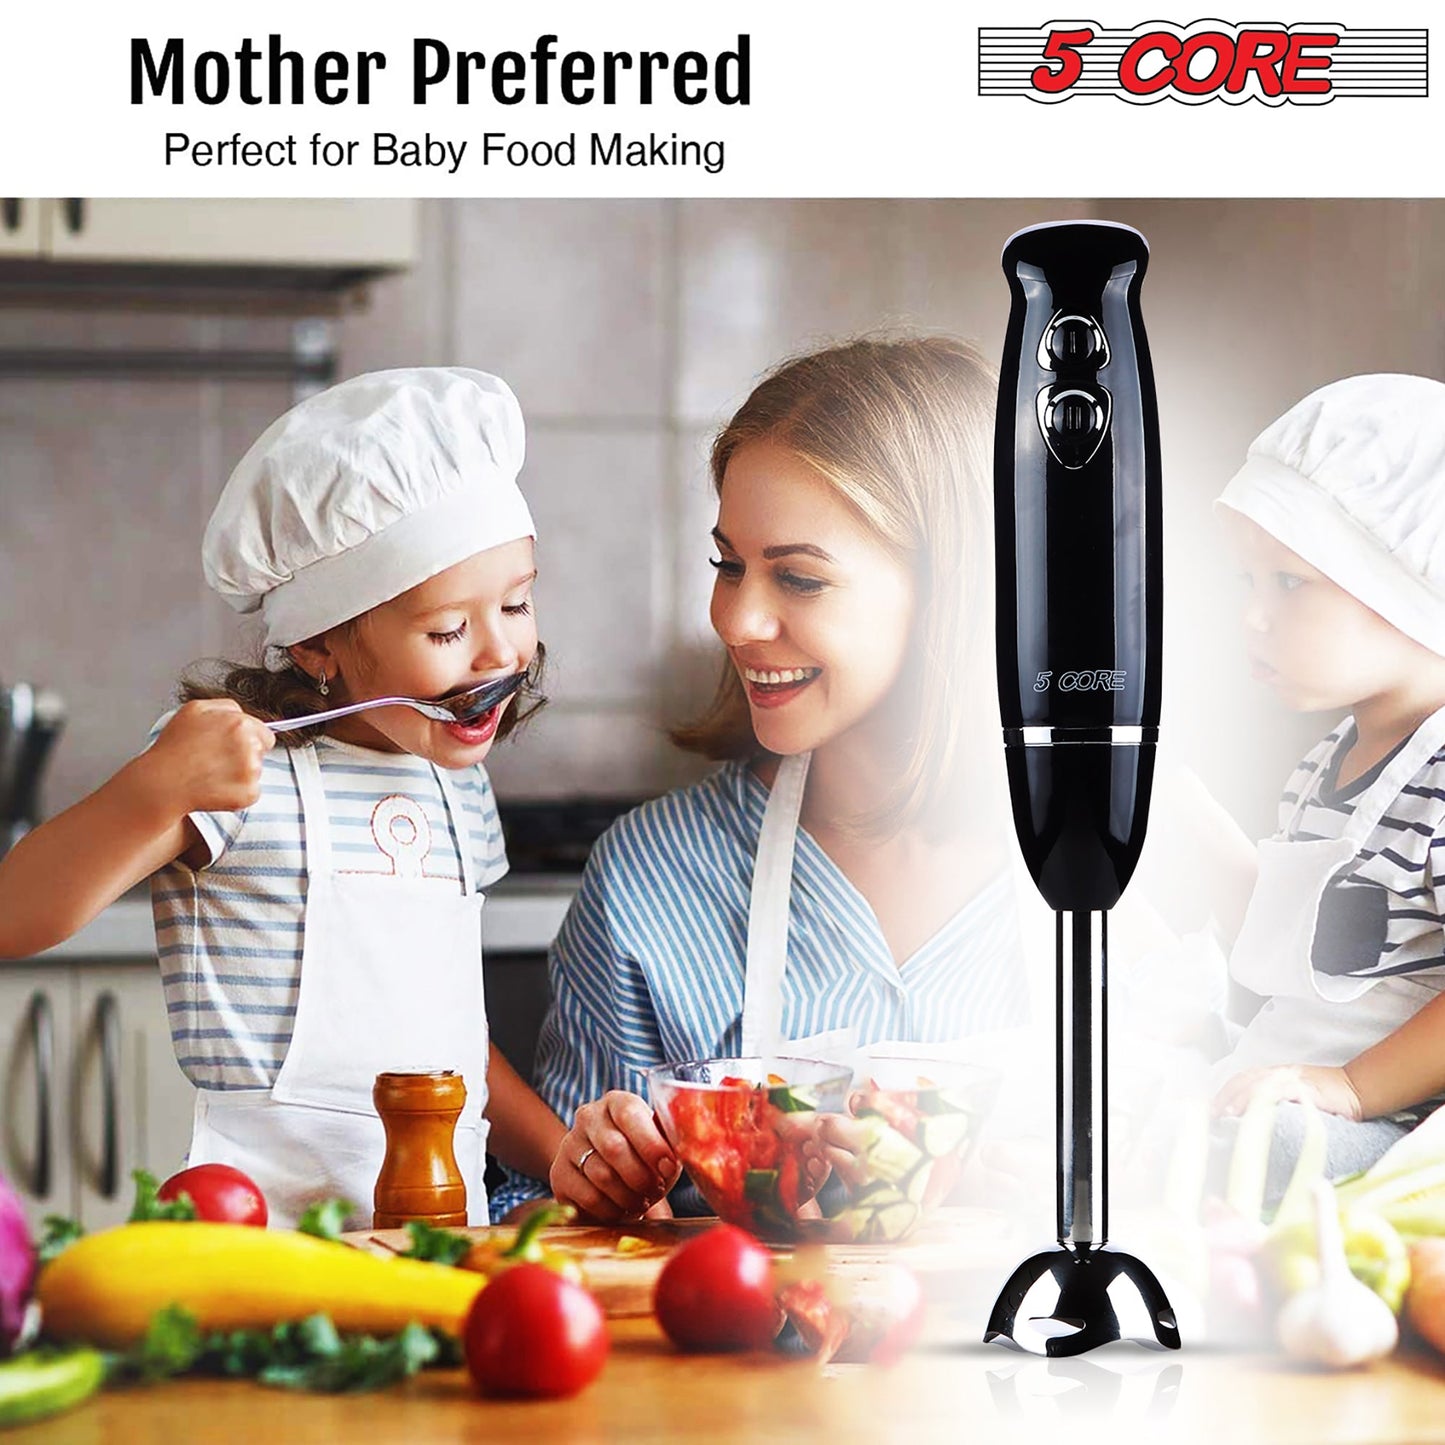 5Core Immersion Hand Blender 500W Electric Handheld Mixer w 2 Mixing Speed for Smoothies Puree-11